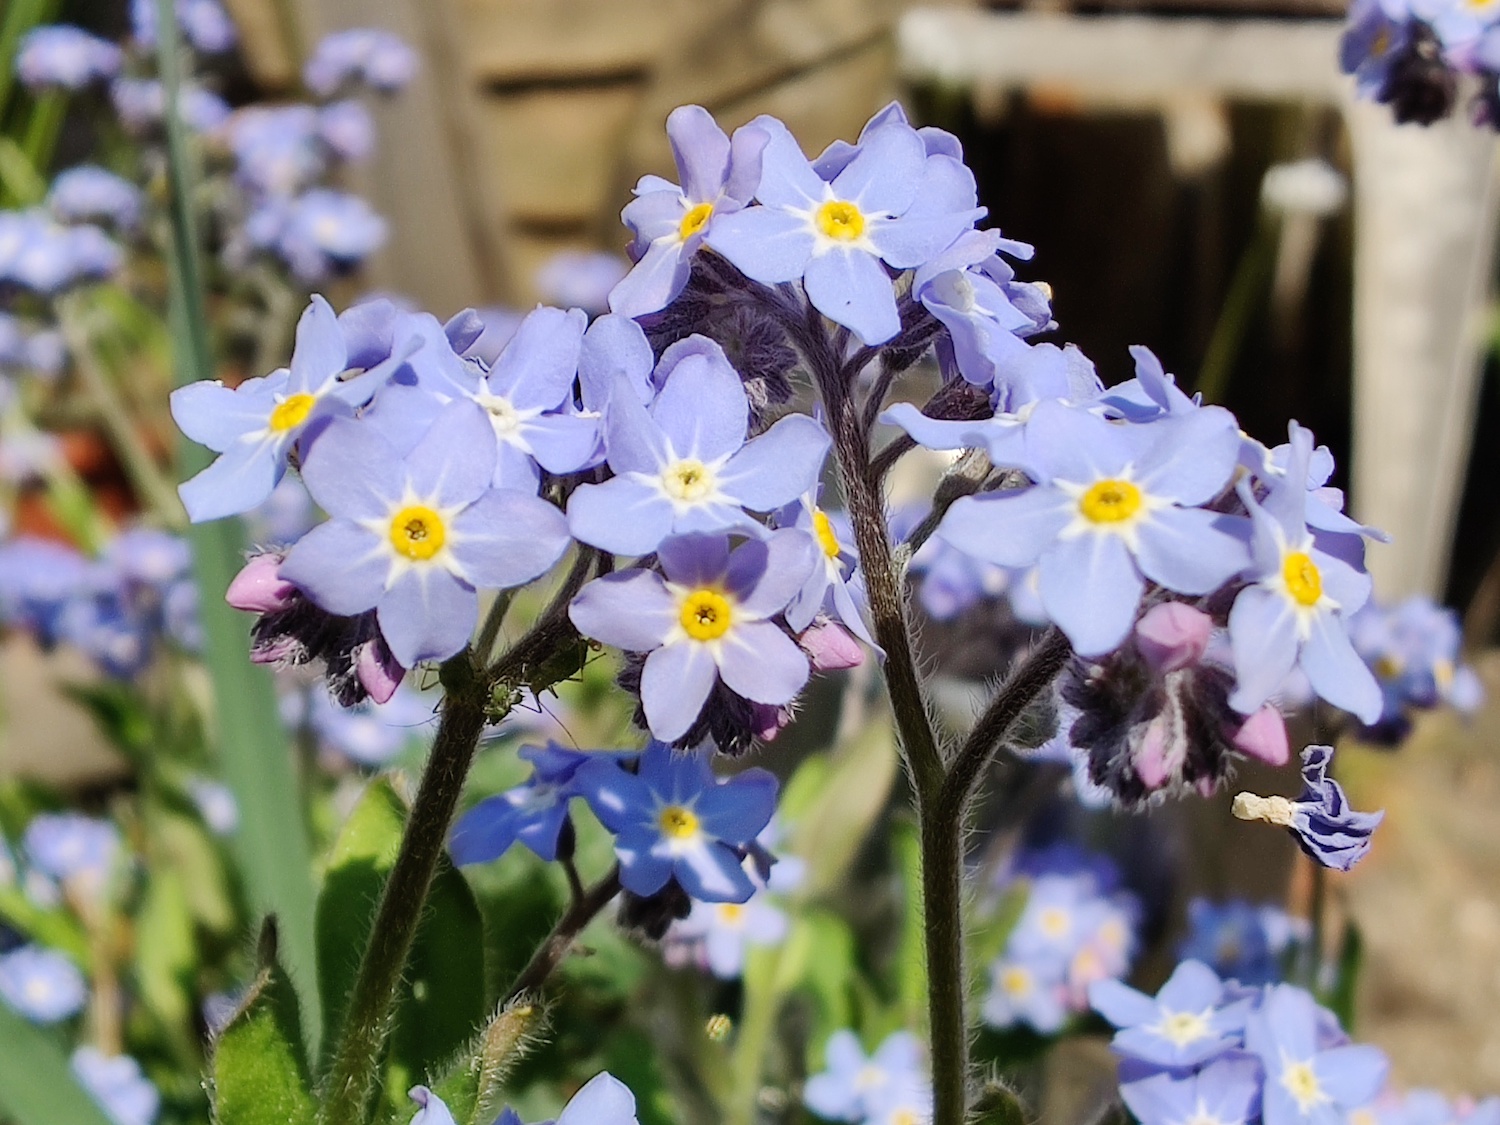 oneplus 8 pro review blue flowers